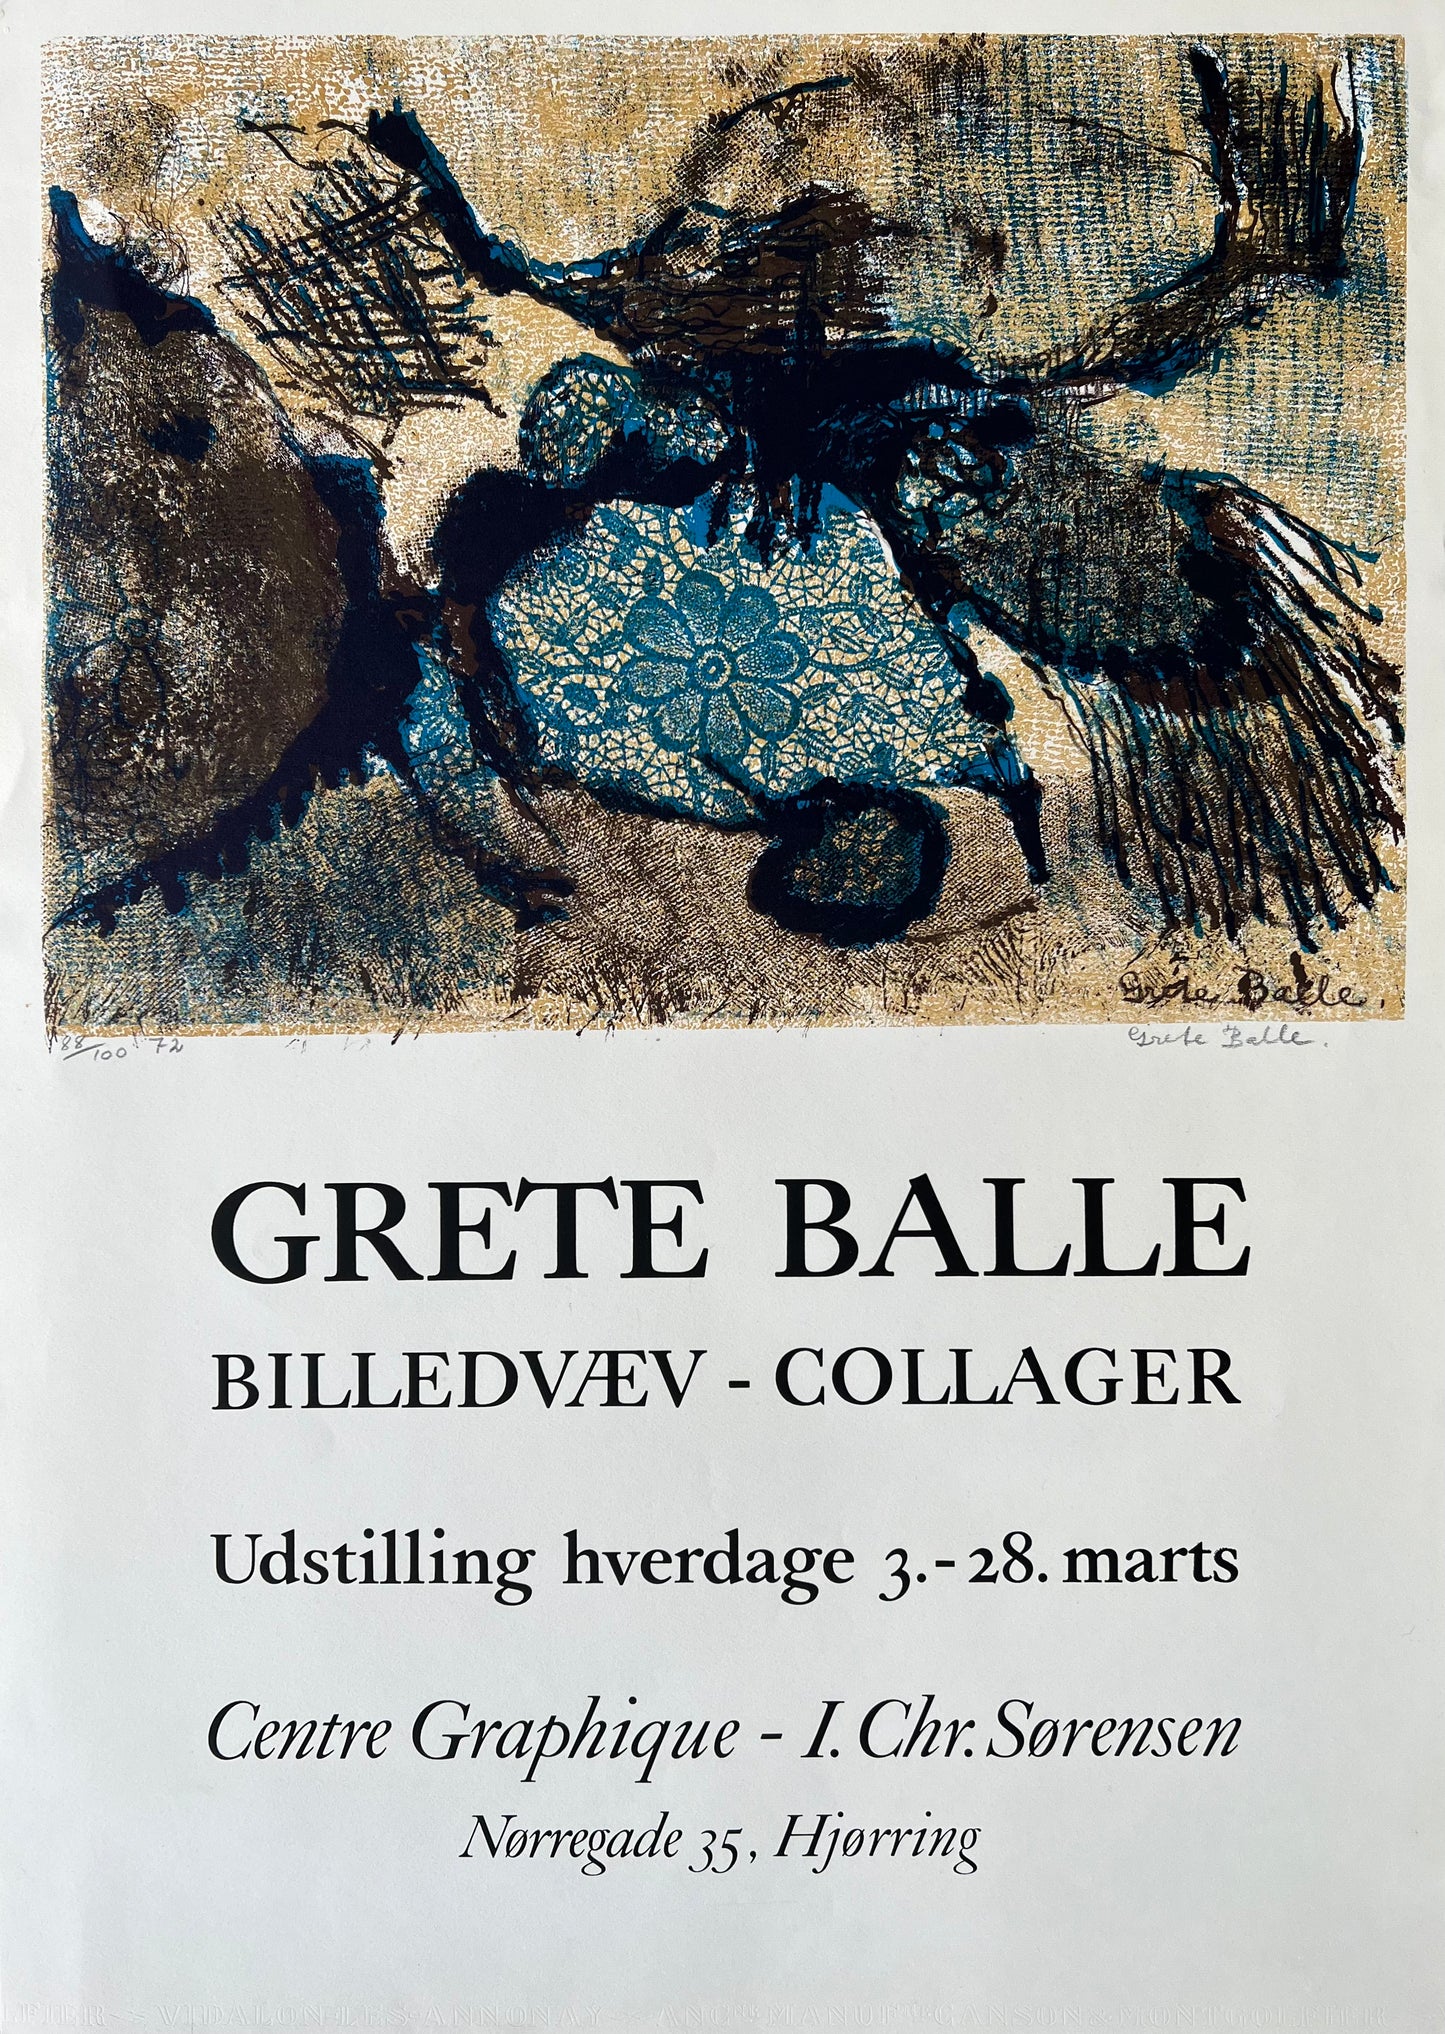 Grete Balle. "Image fabric - Collages", 1972